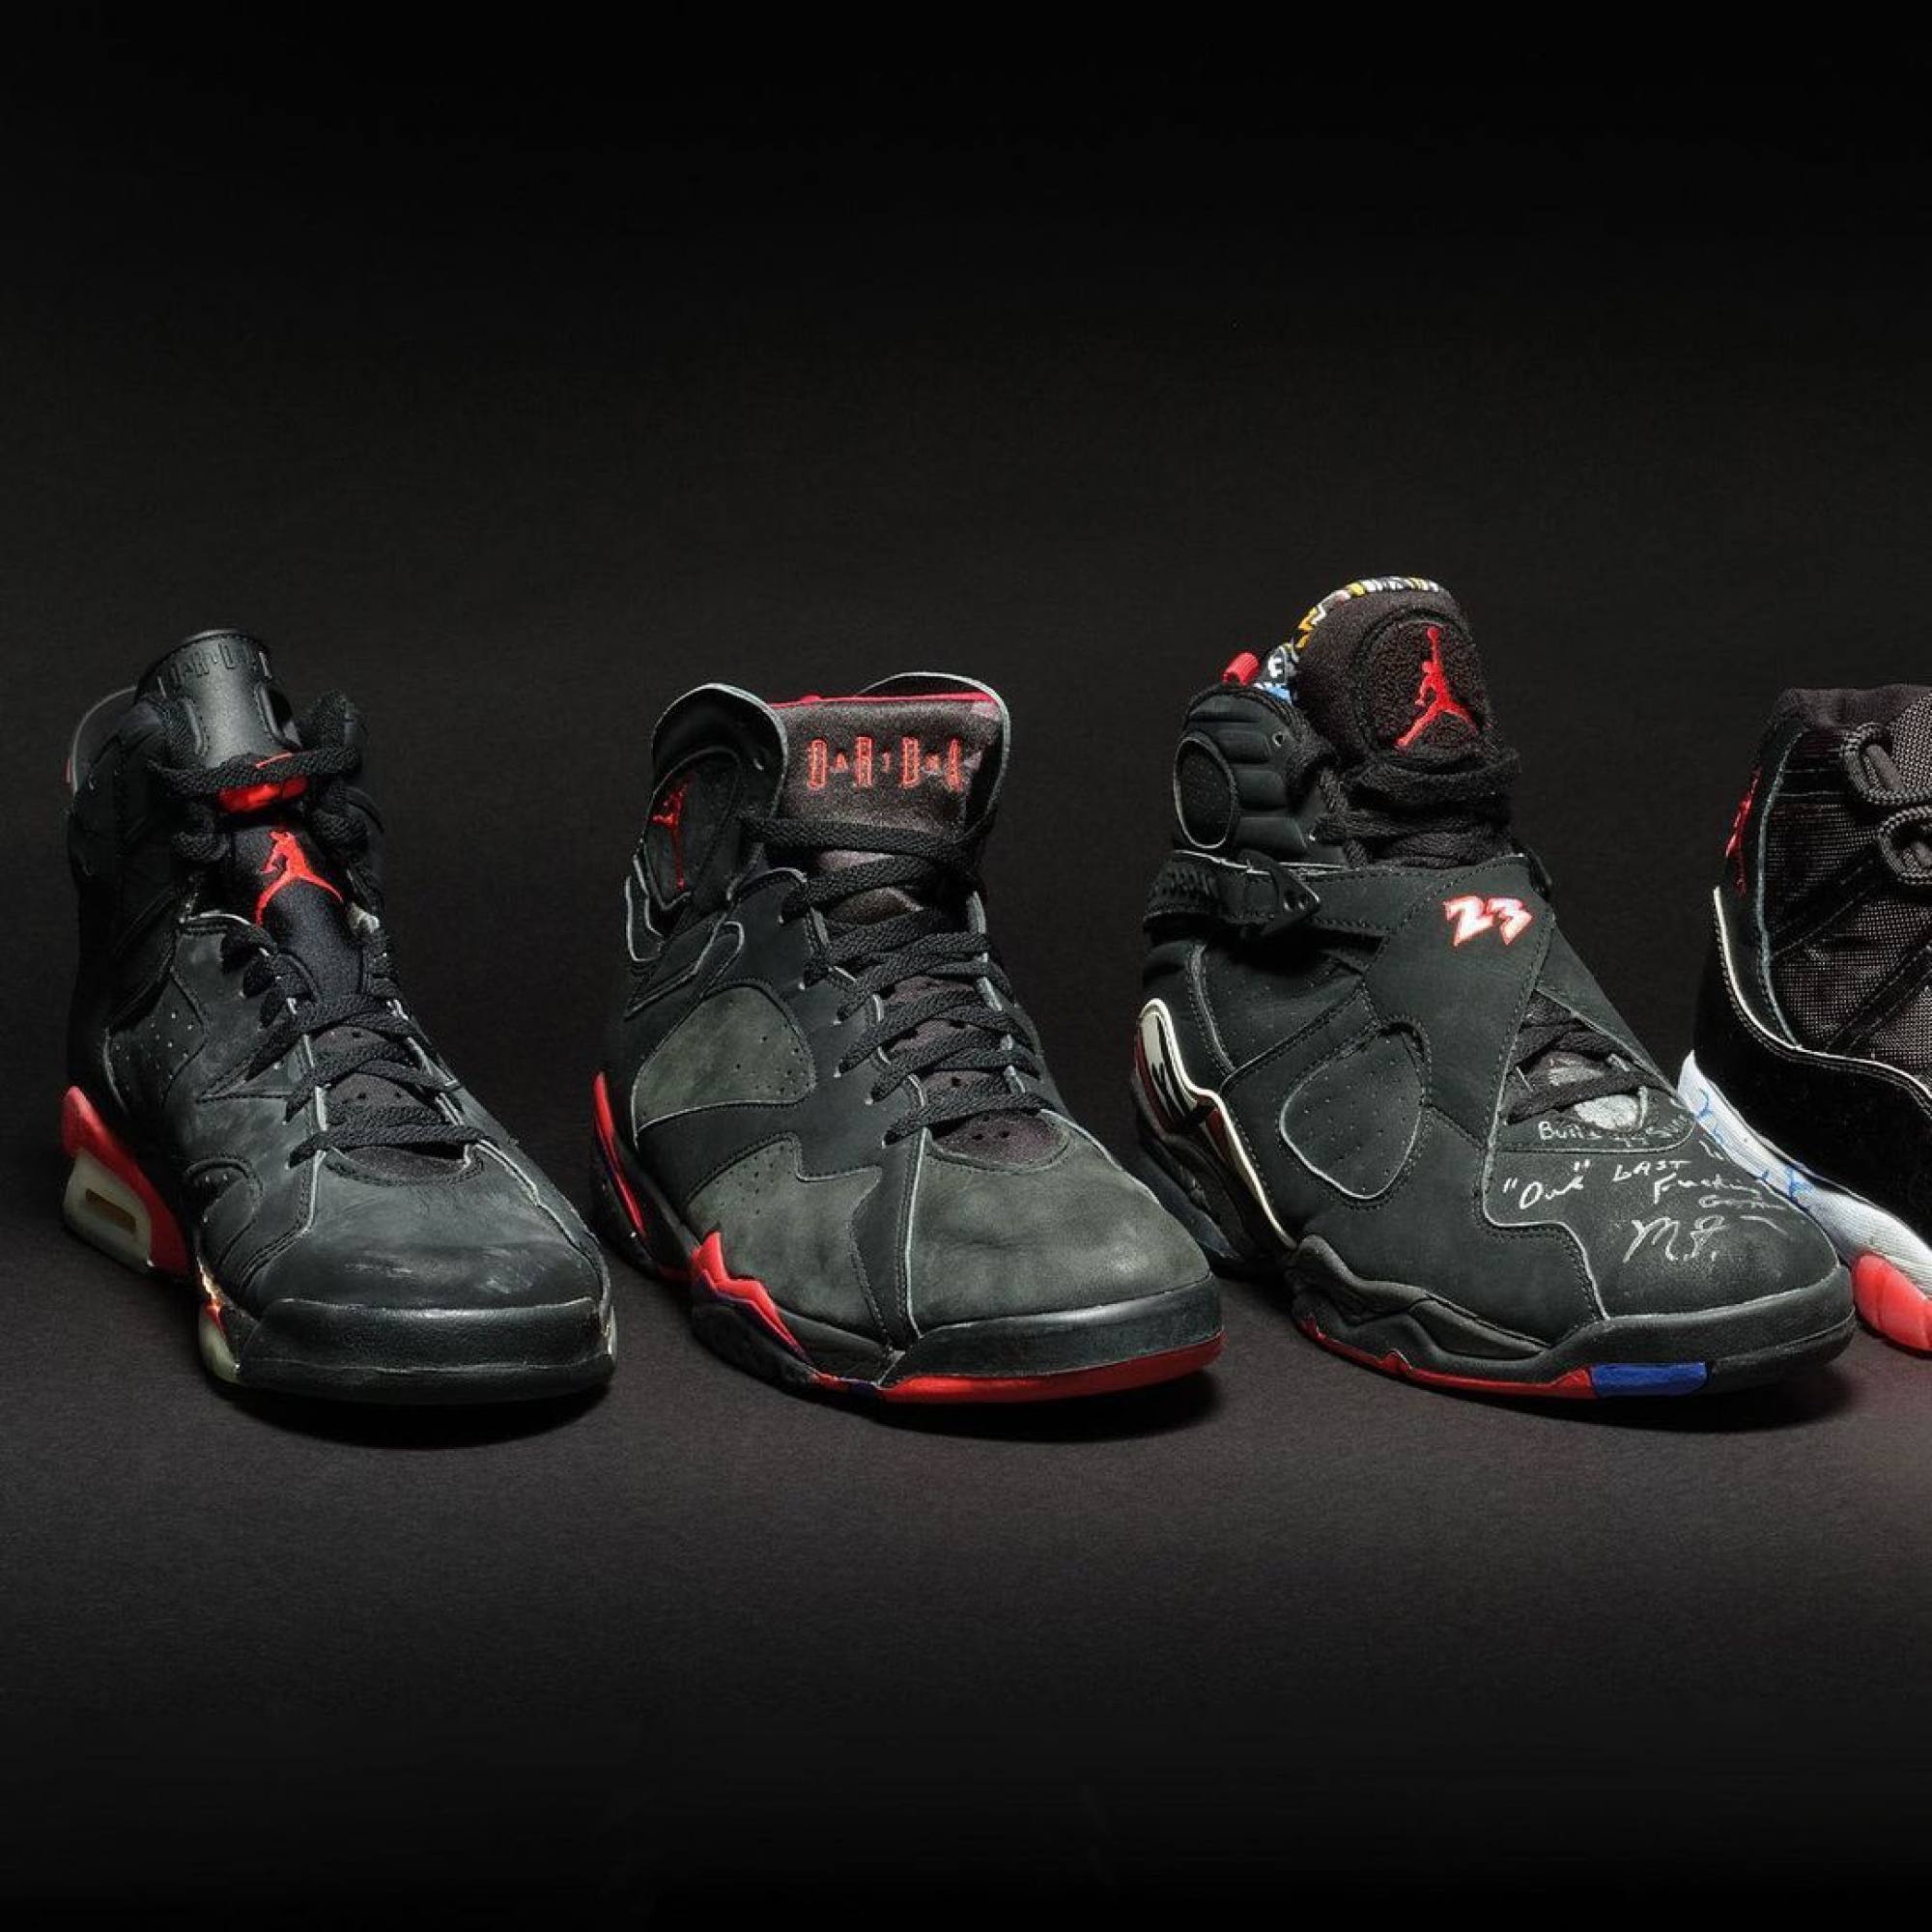 The 'holy of sneakers: Michael Jordan's NBA are for sale – 6 pairs of Air Jordan shoes the elite 'Dynasty Collection' are expected to sell for millions at